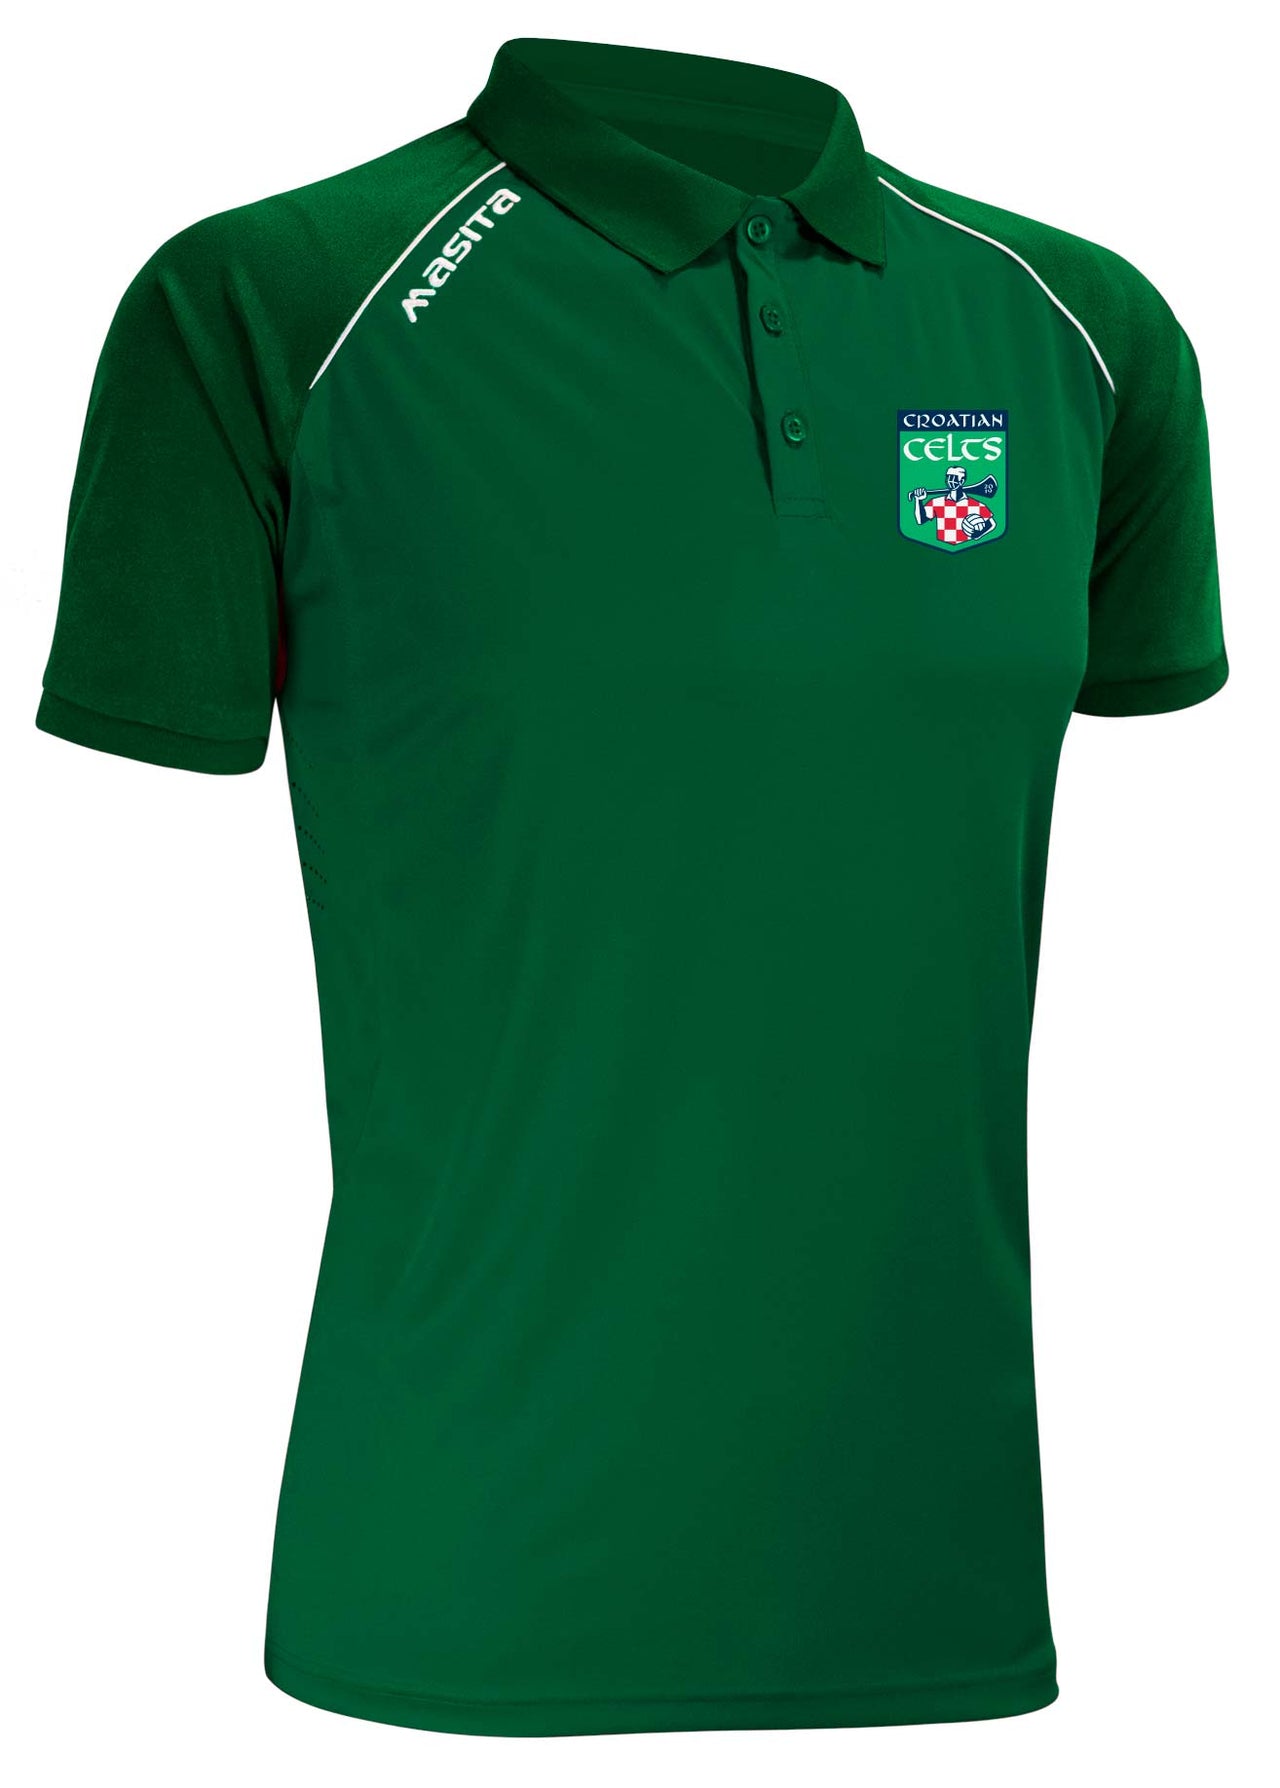 Croatian Celts Supreme Semi Fitted Polo Adults